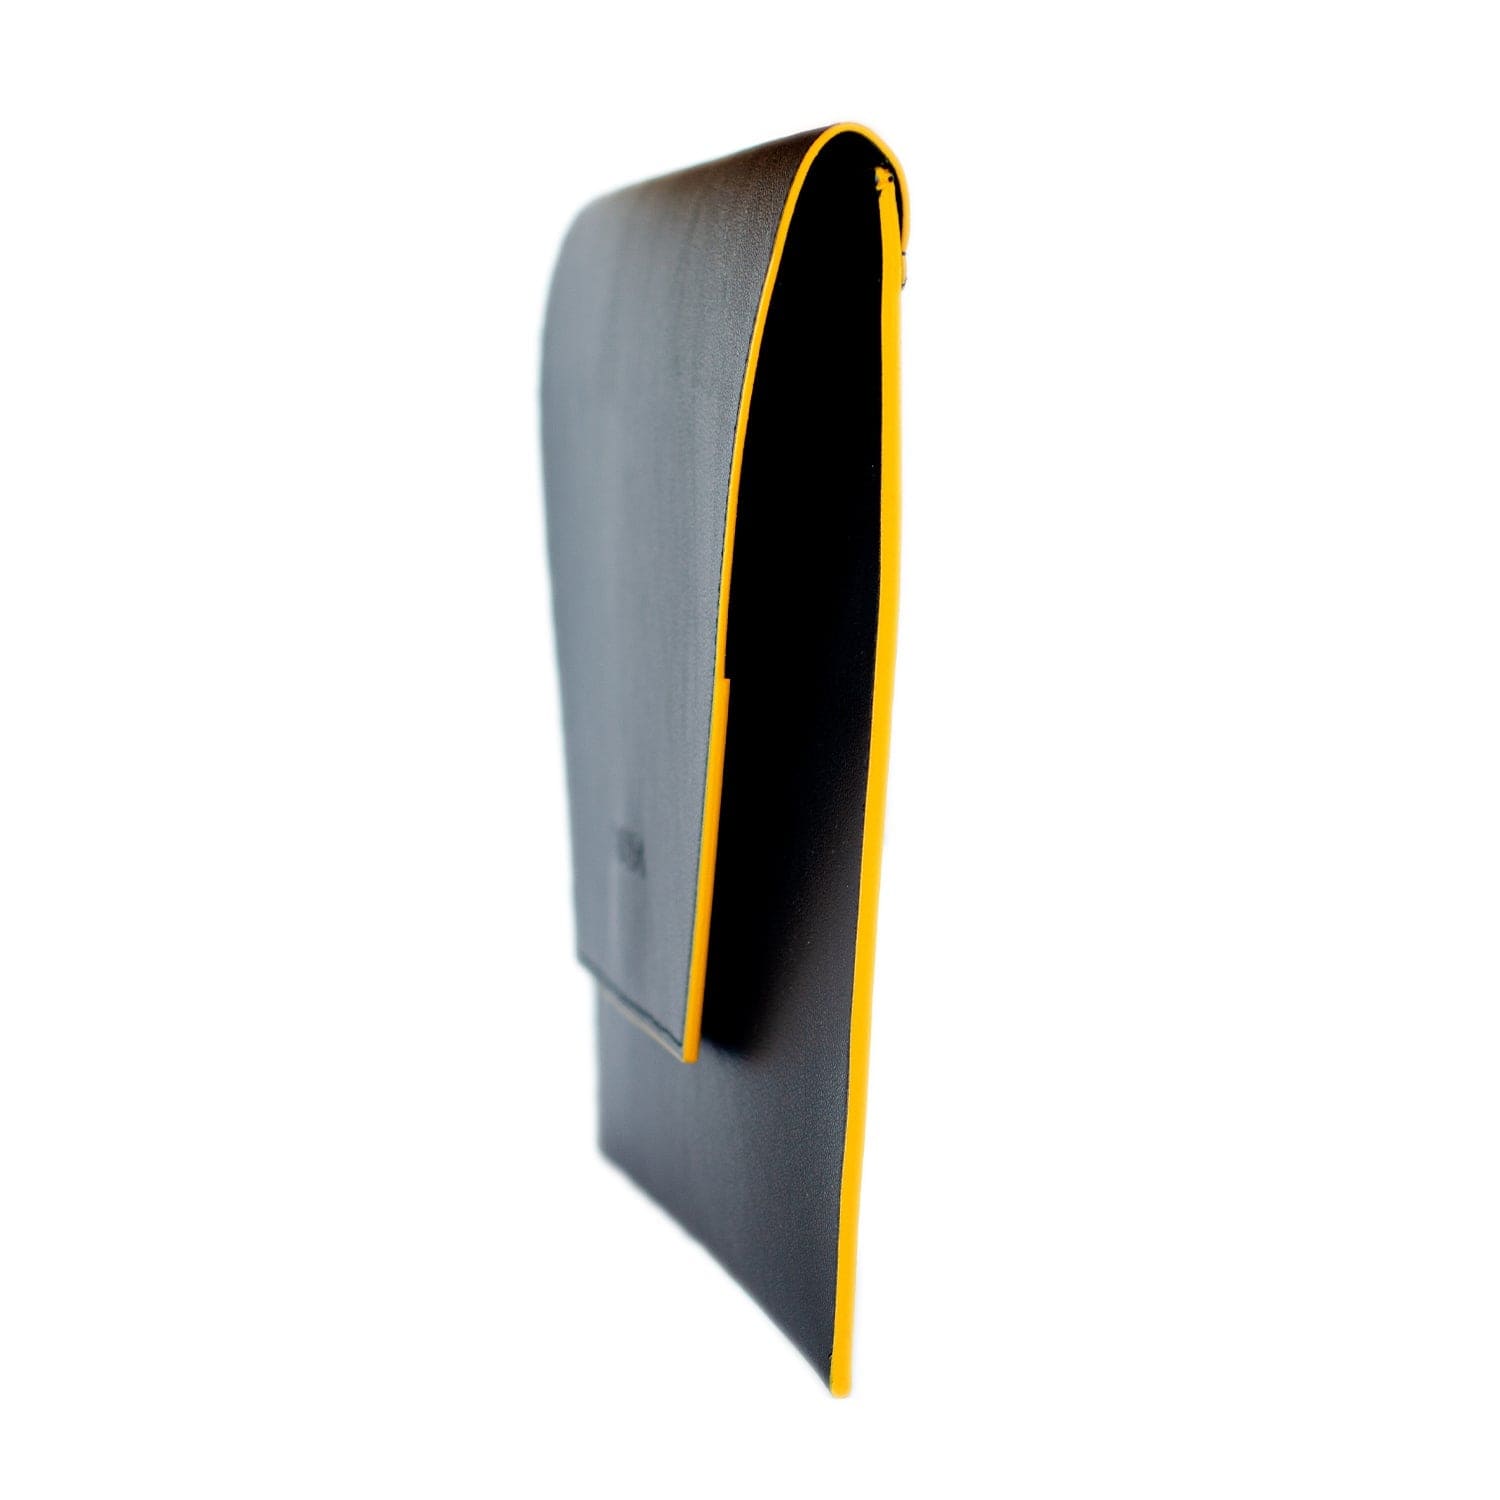 Canussa Protect case - Black/Yellow